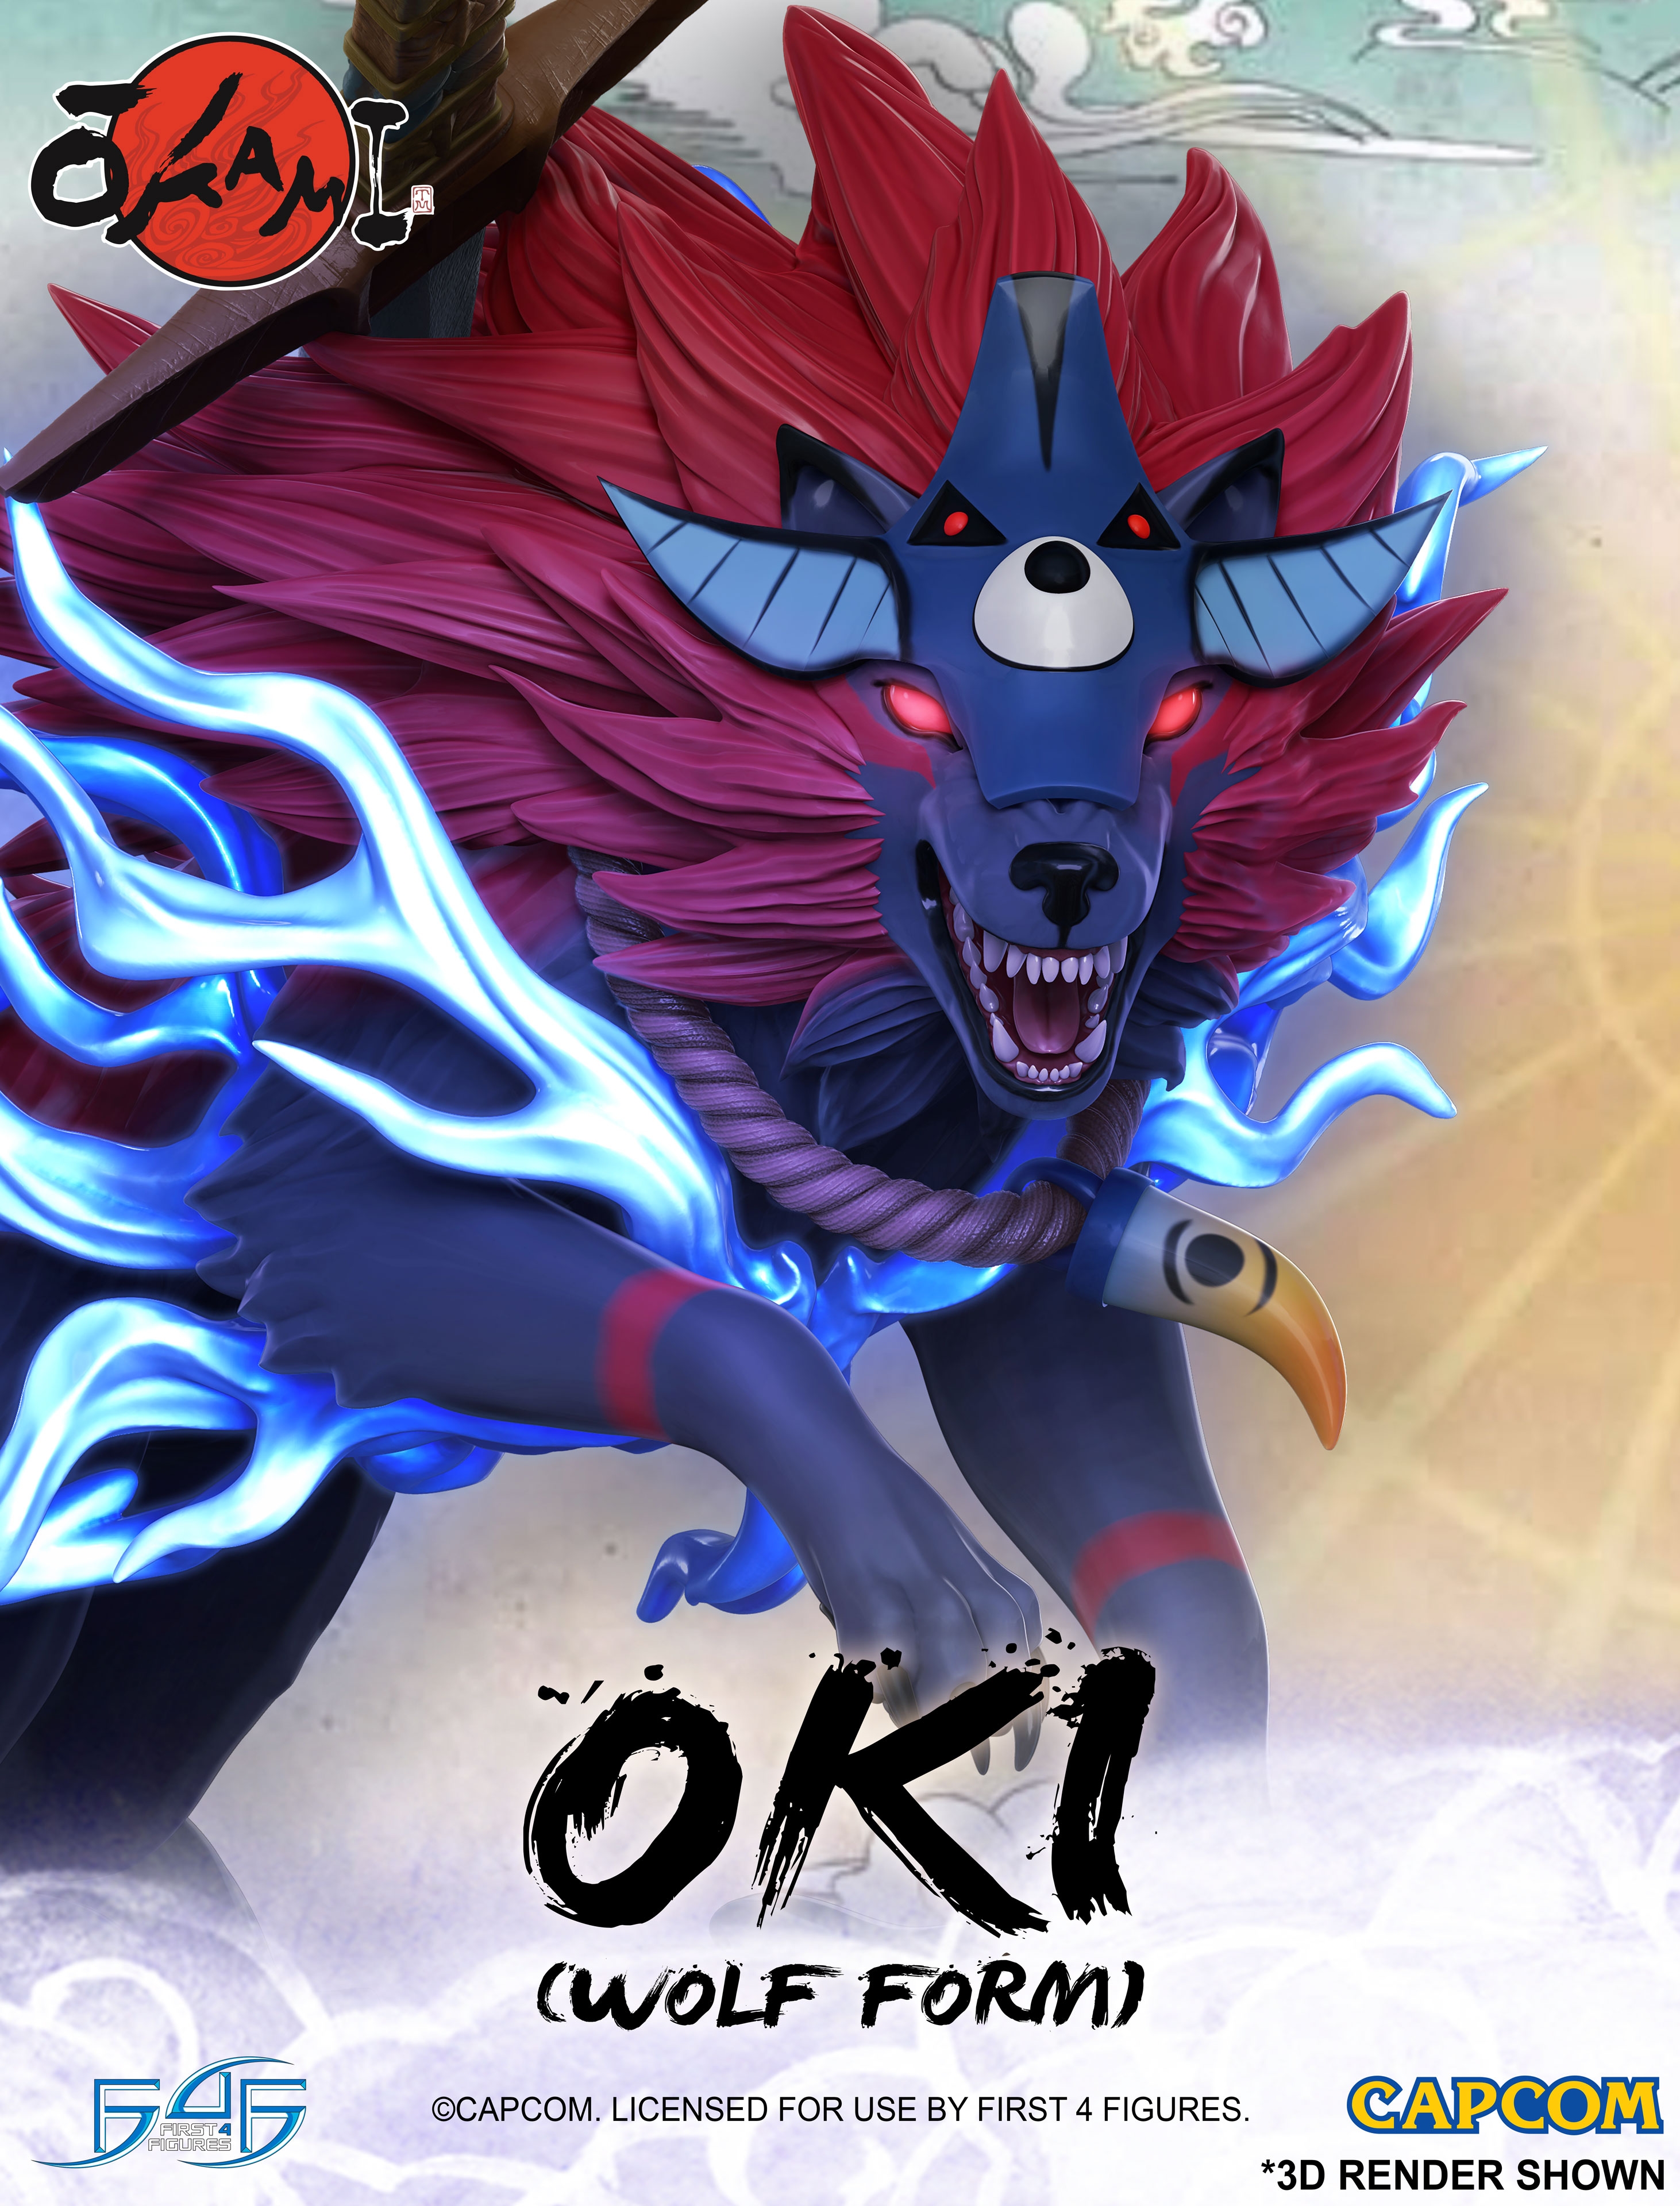 A First Look at First 4 Figures' Okami – Oki (Wolf Form) Statue